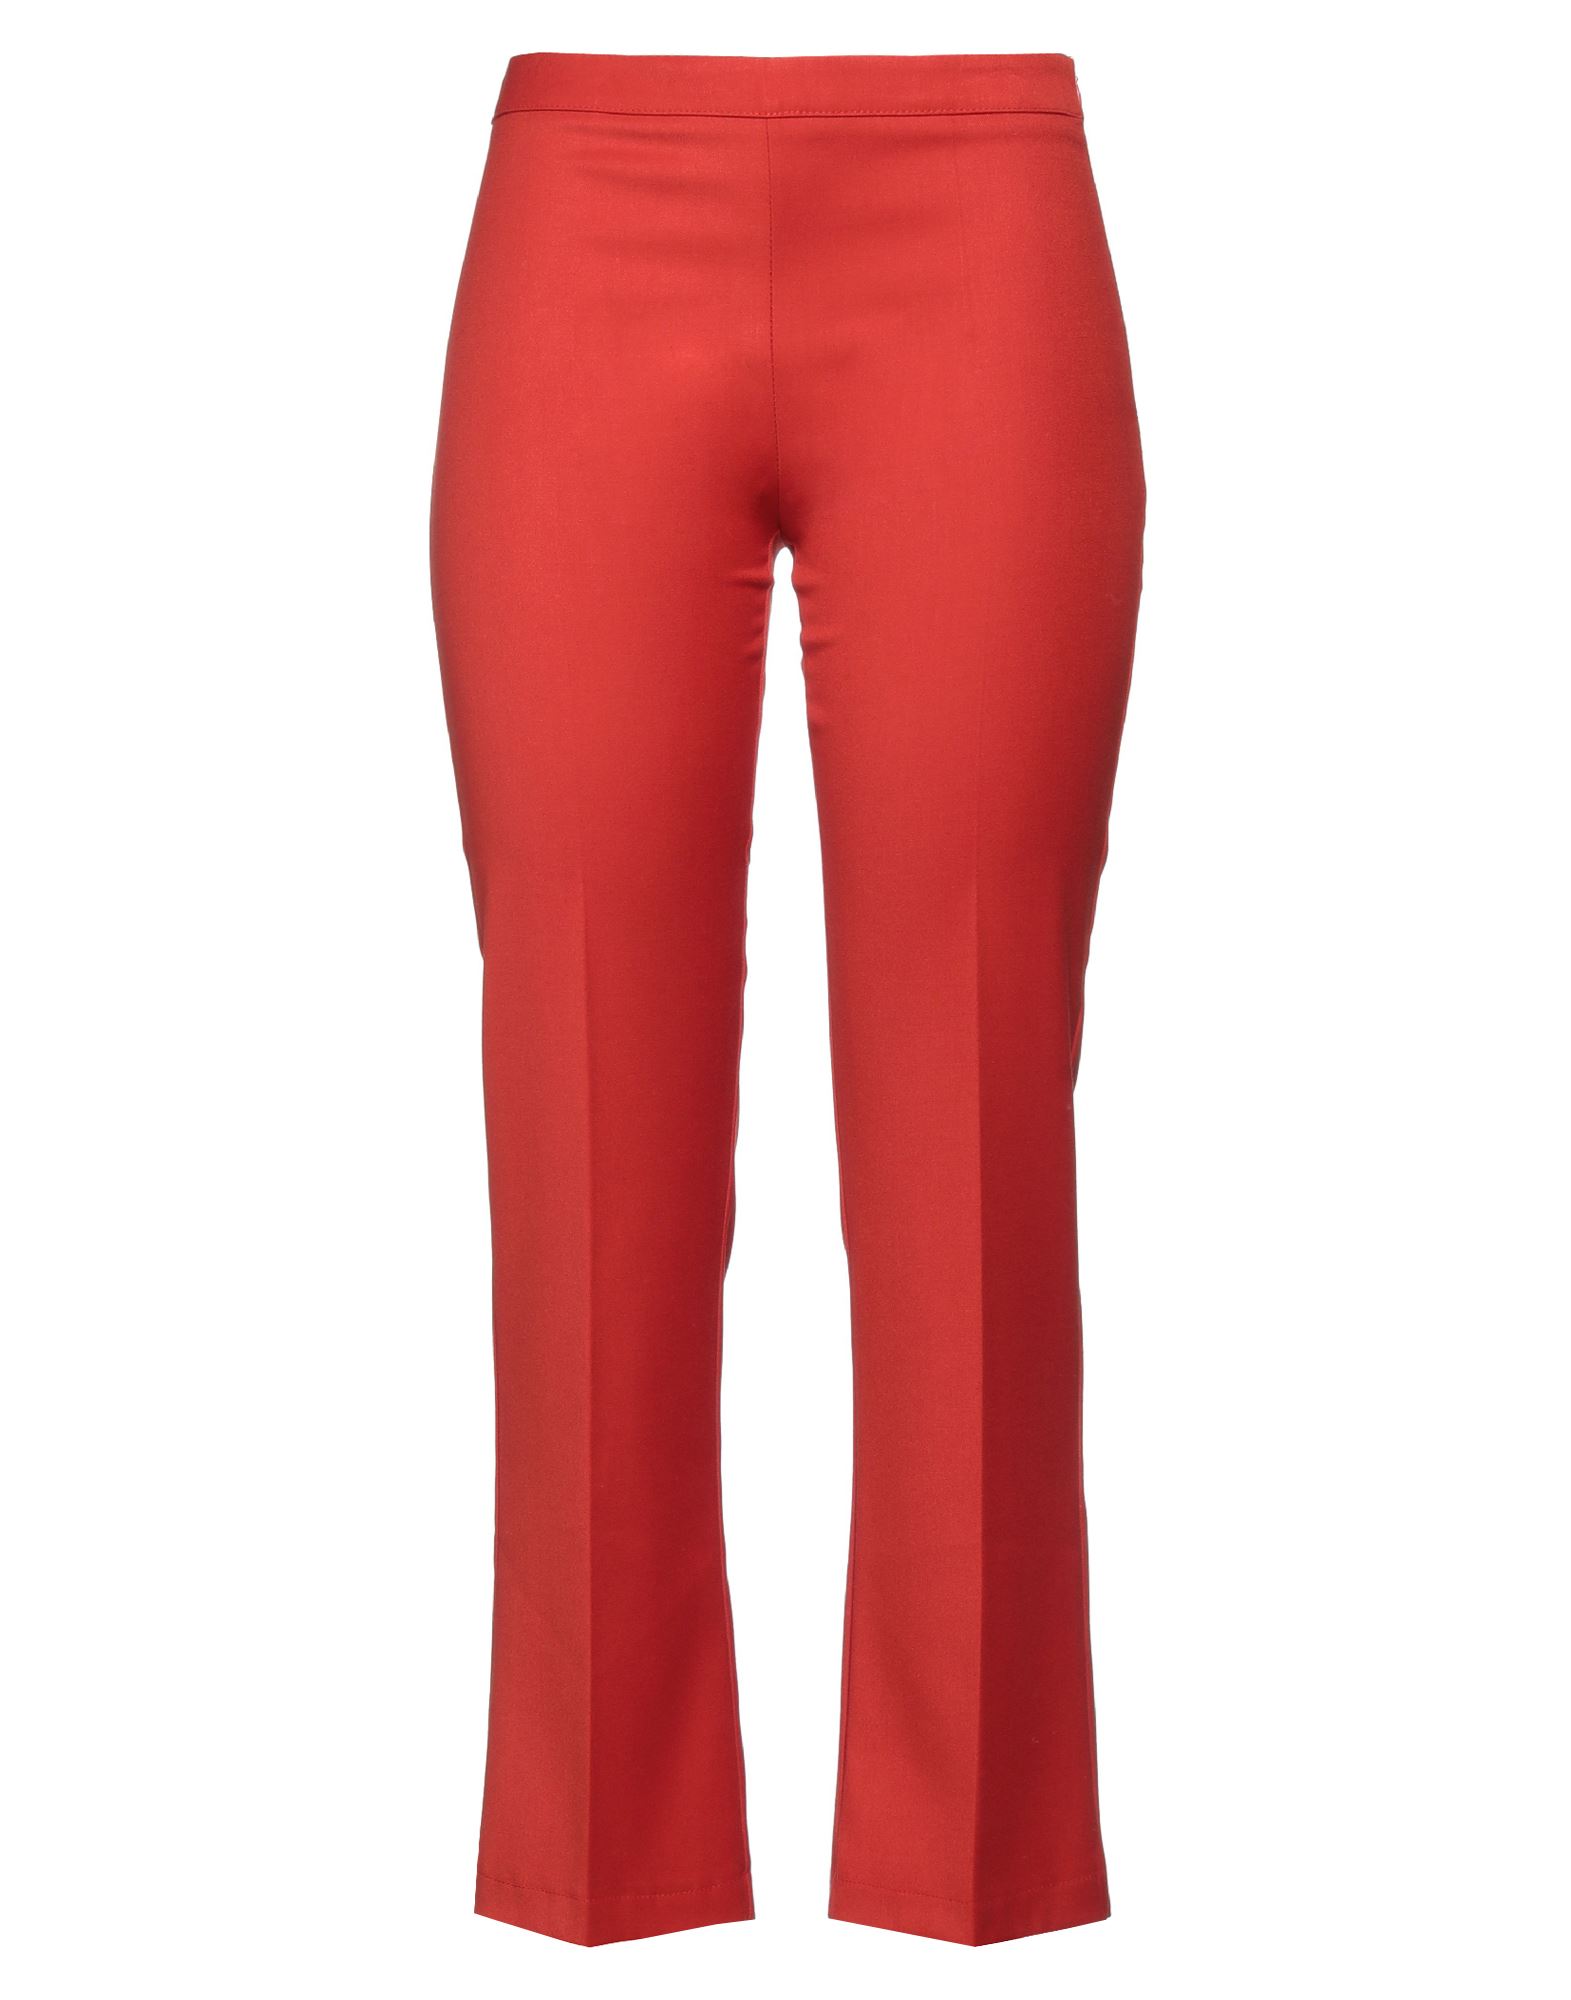 Operà Woman Pants Rust Size 6 Polyester, Viscose, Elastane In Red